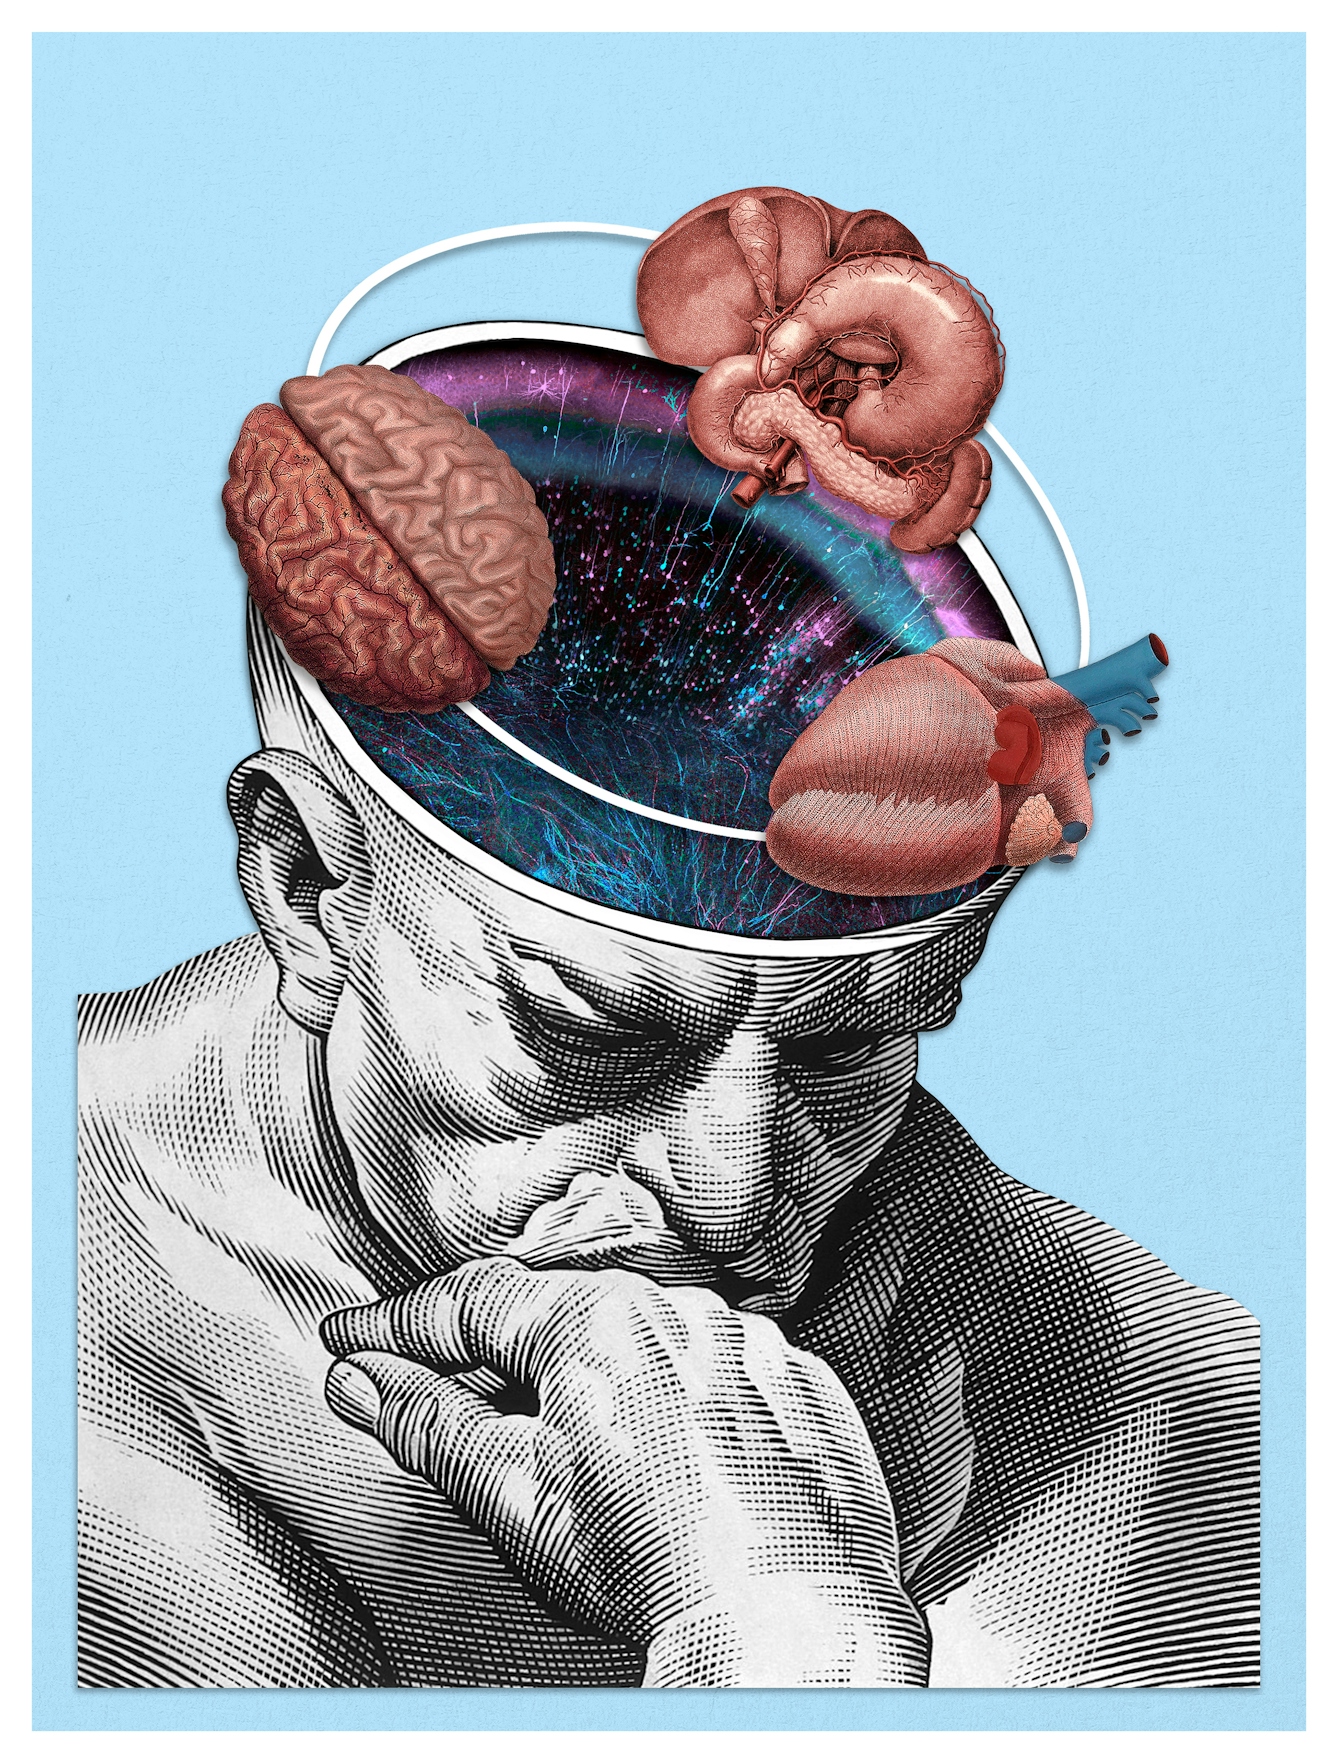 Digital collage of archival material.  Head and shoulders of a man in a thinking pose with his chin resting on his hand. His head has been cross-sectioned.  The resulting void shows a series of colourful electrical impulses.  Surrounding the head are archival illustrations of the brain, the heart and the stomach.